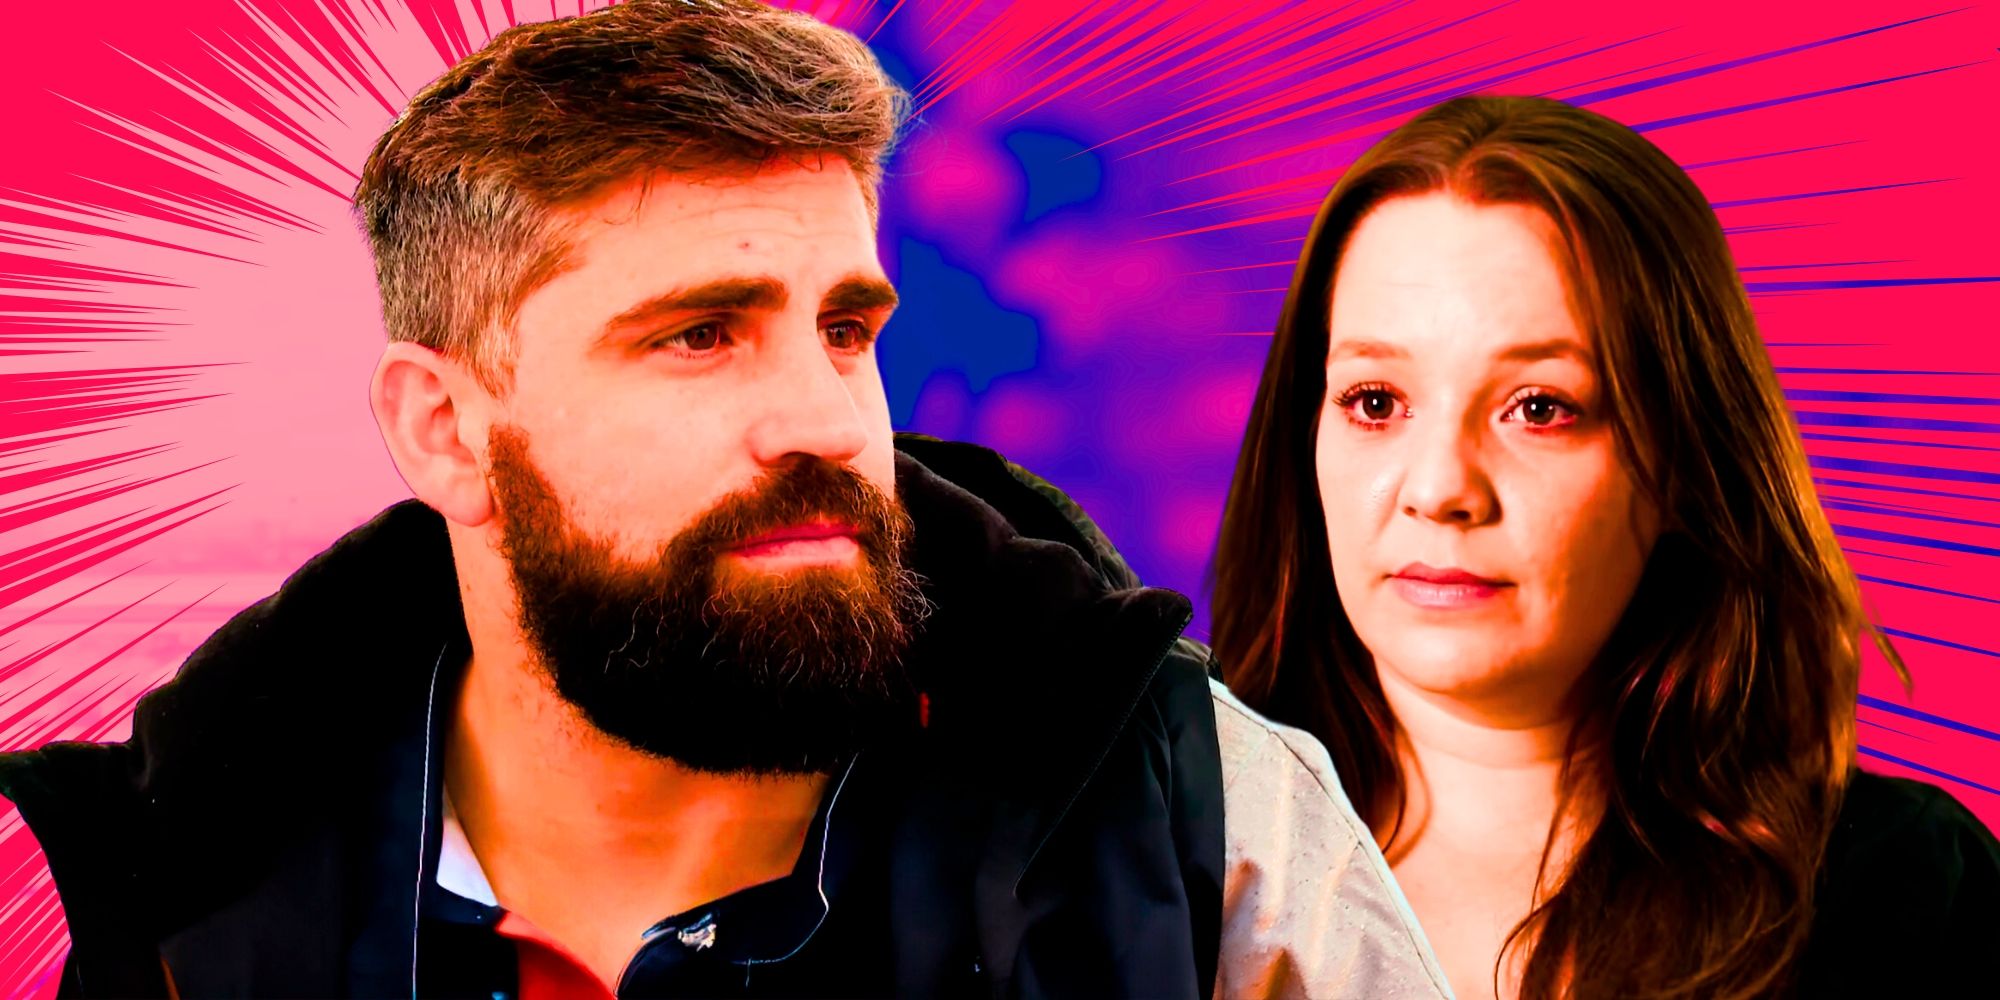 90 Day Fiancé’s Jon and Rachel Walters looking serious